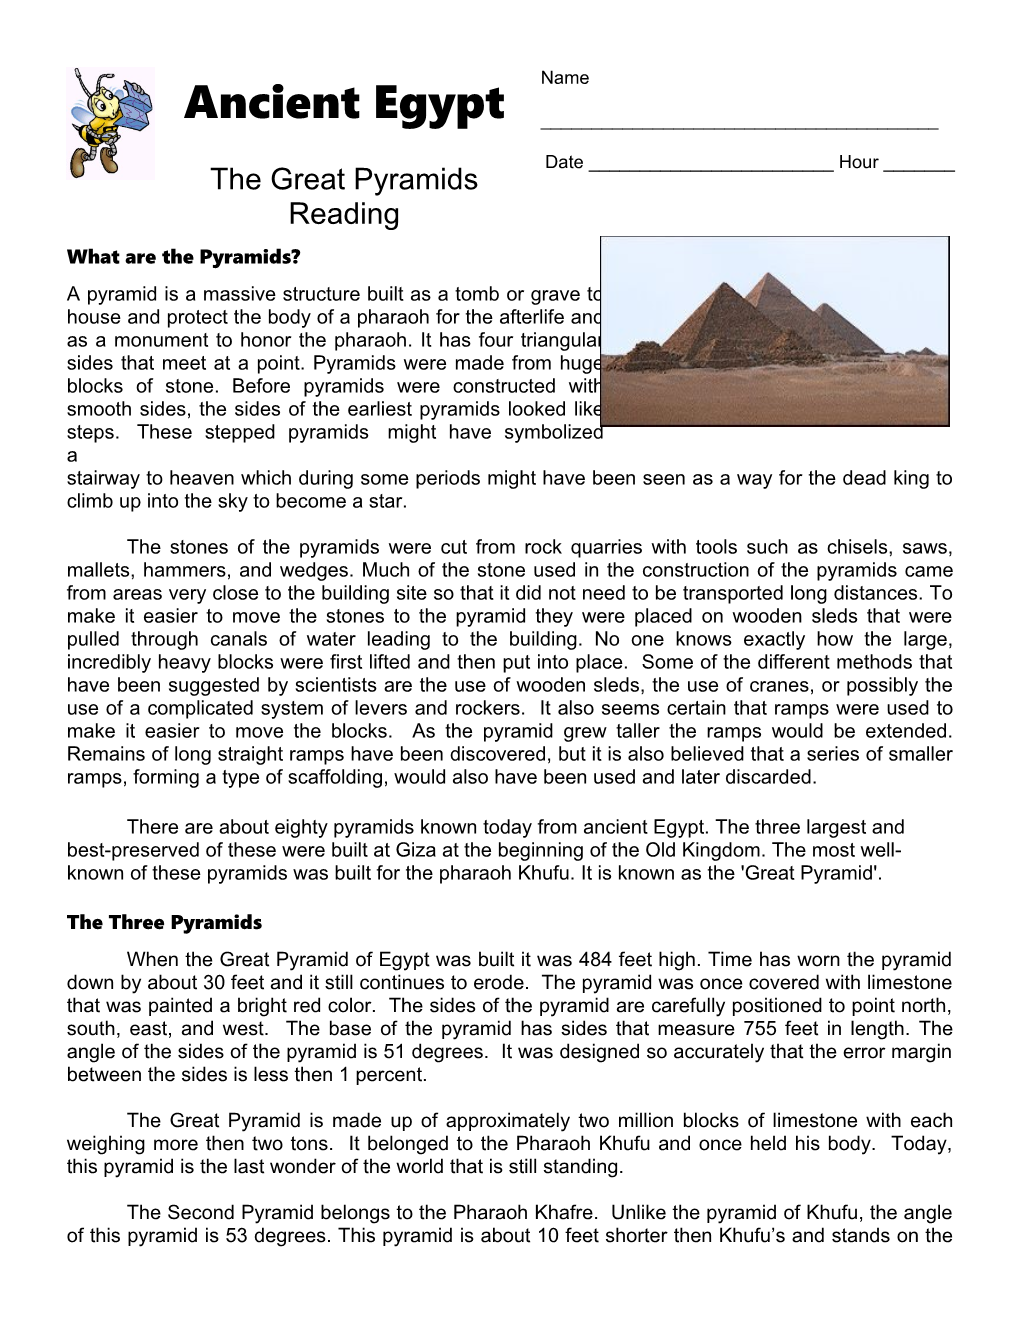 Why Were the Pyramids Built